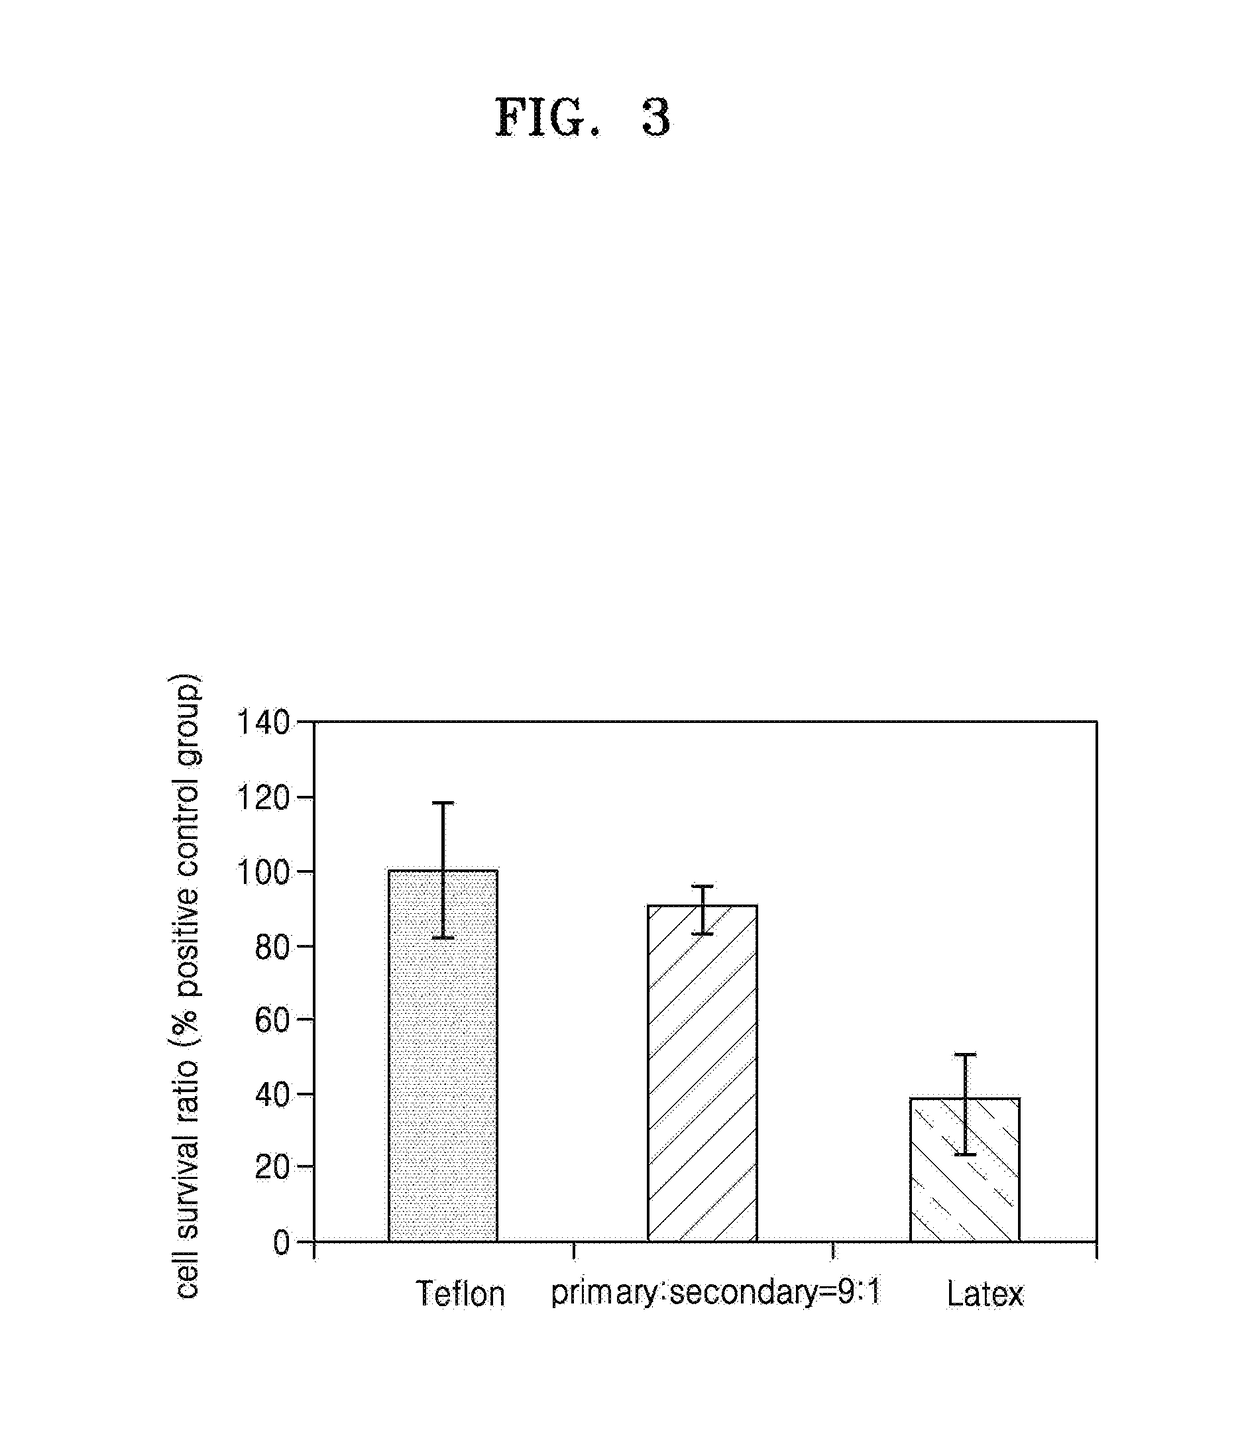 Combination of cross-linked hyaluronic acids and method of preparing the same